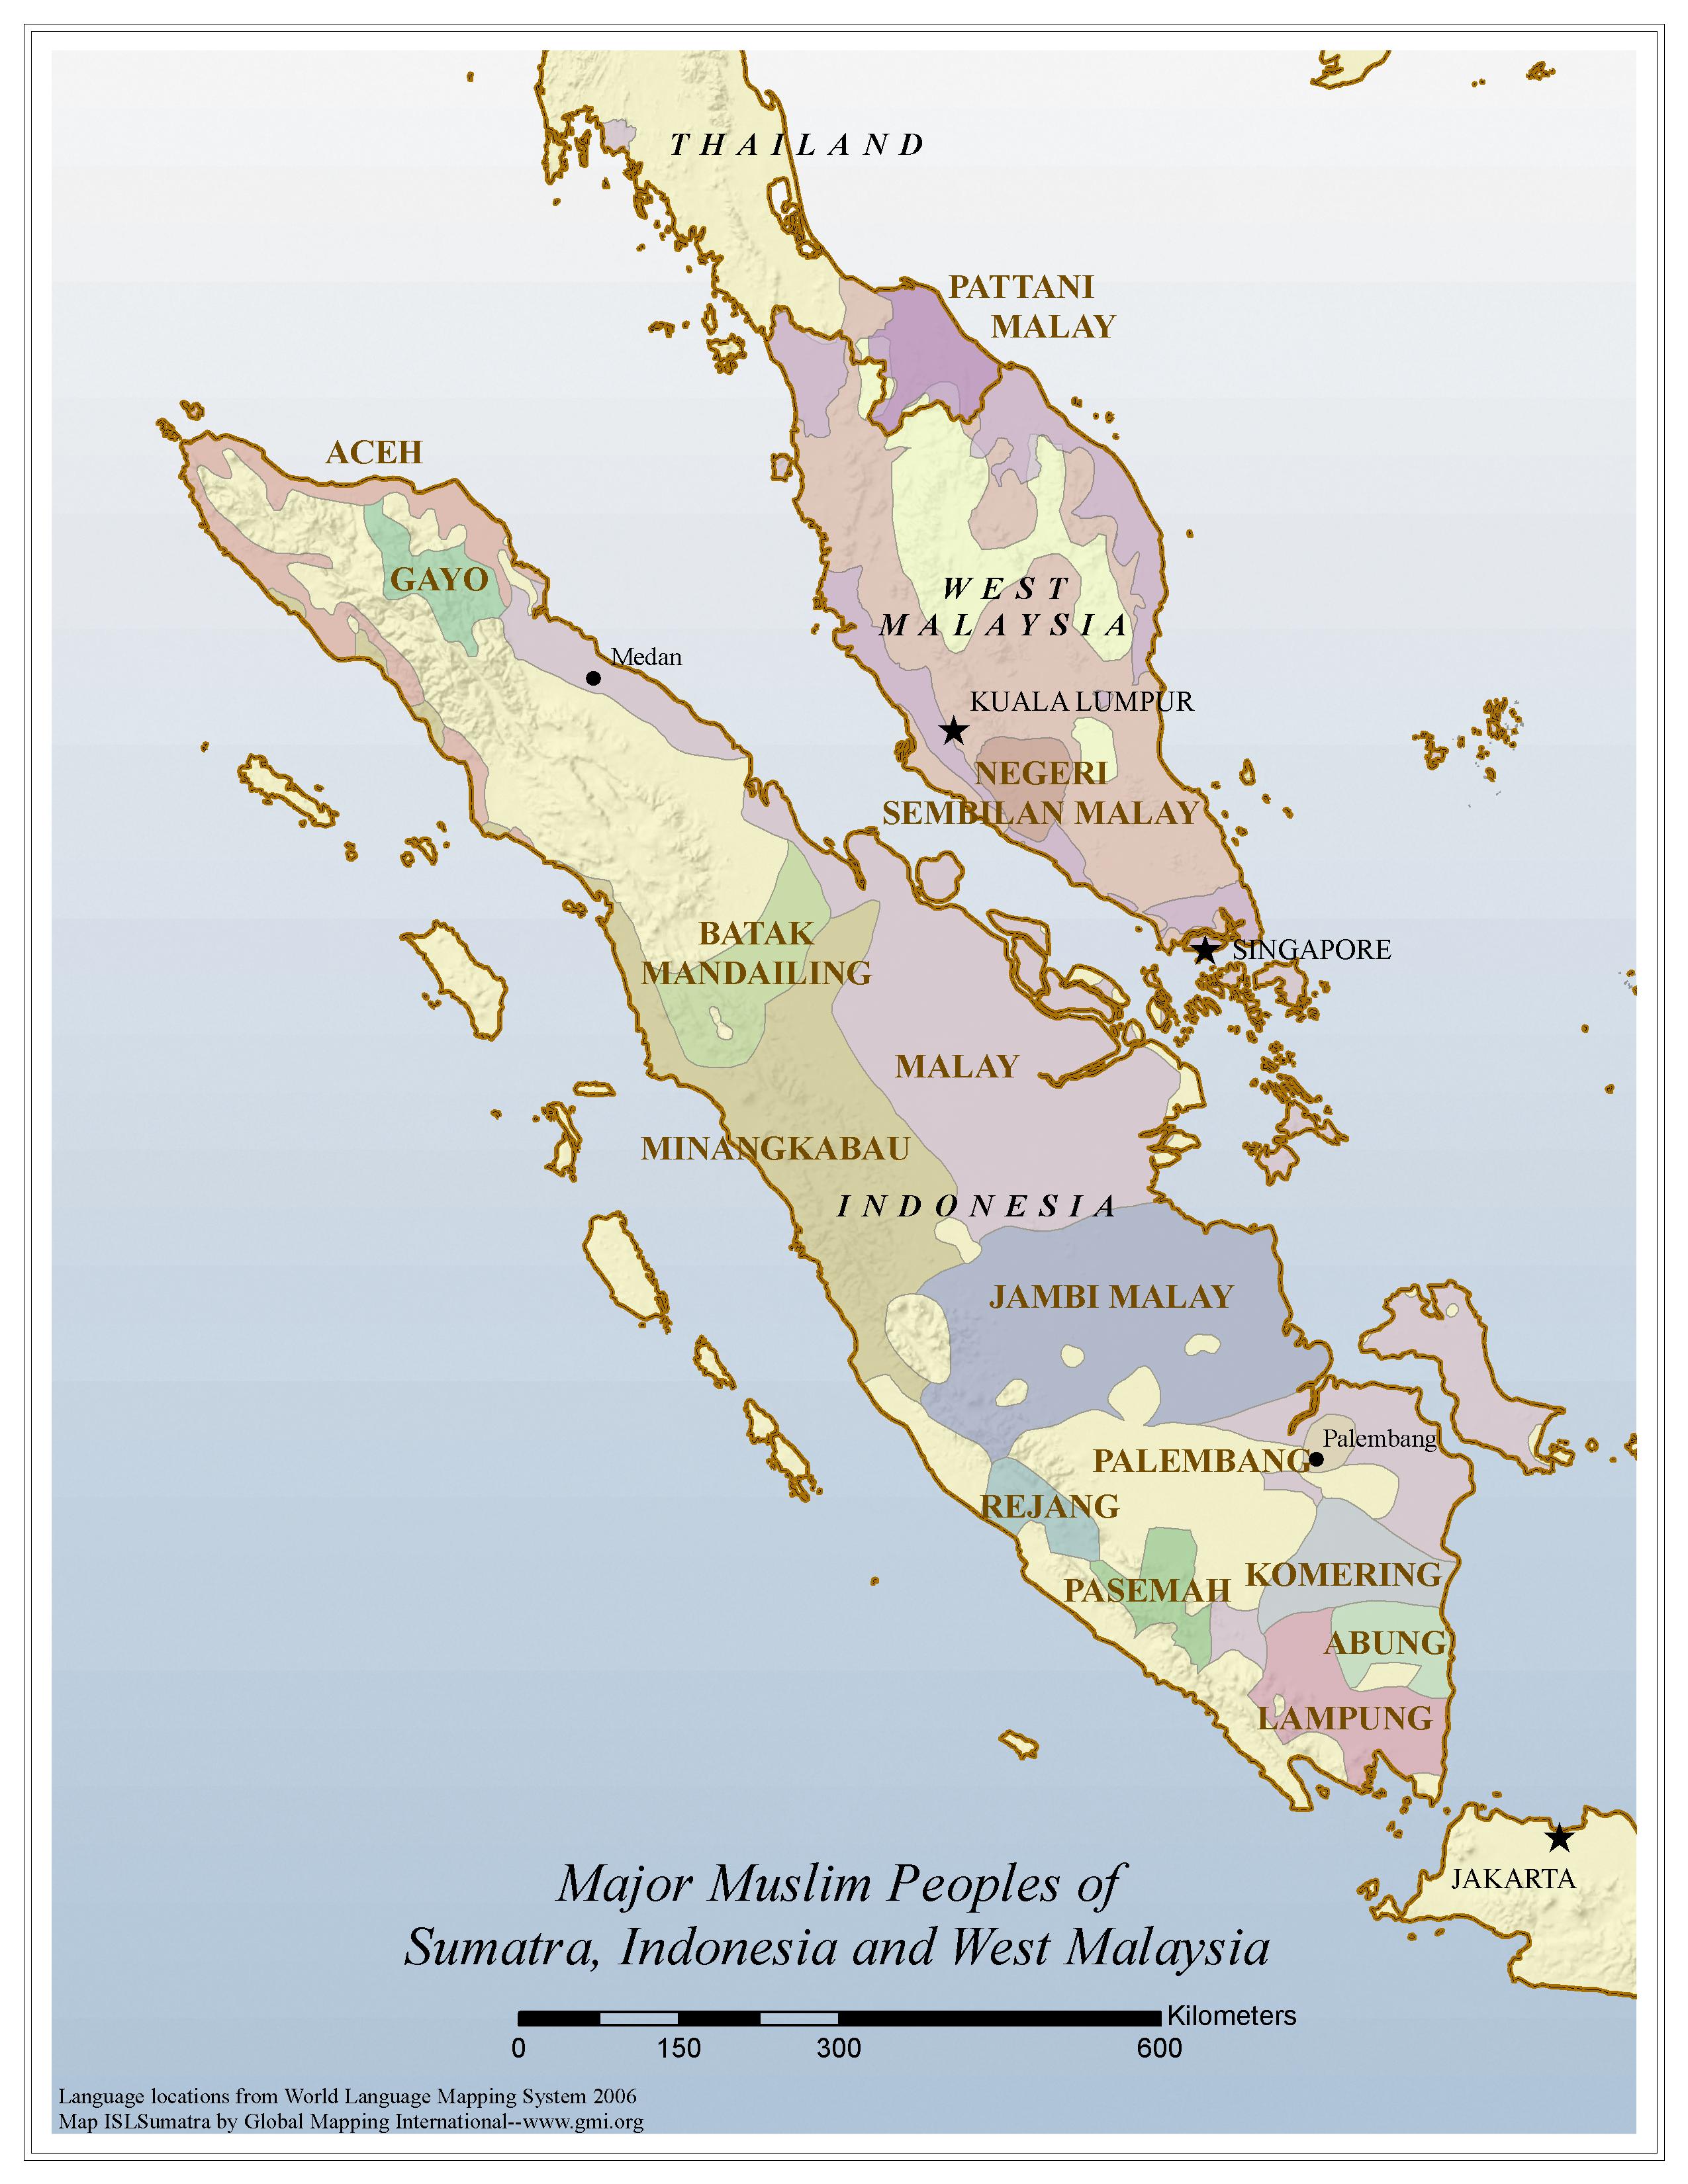 Major Muslim Peoples of Sumatra, Indonesia and West Malaysia